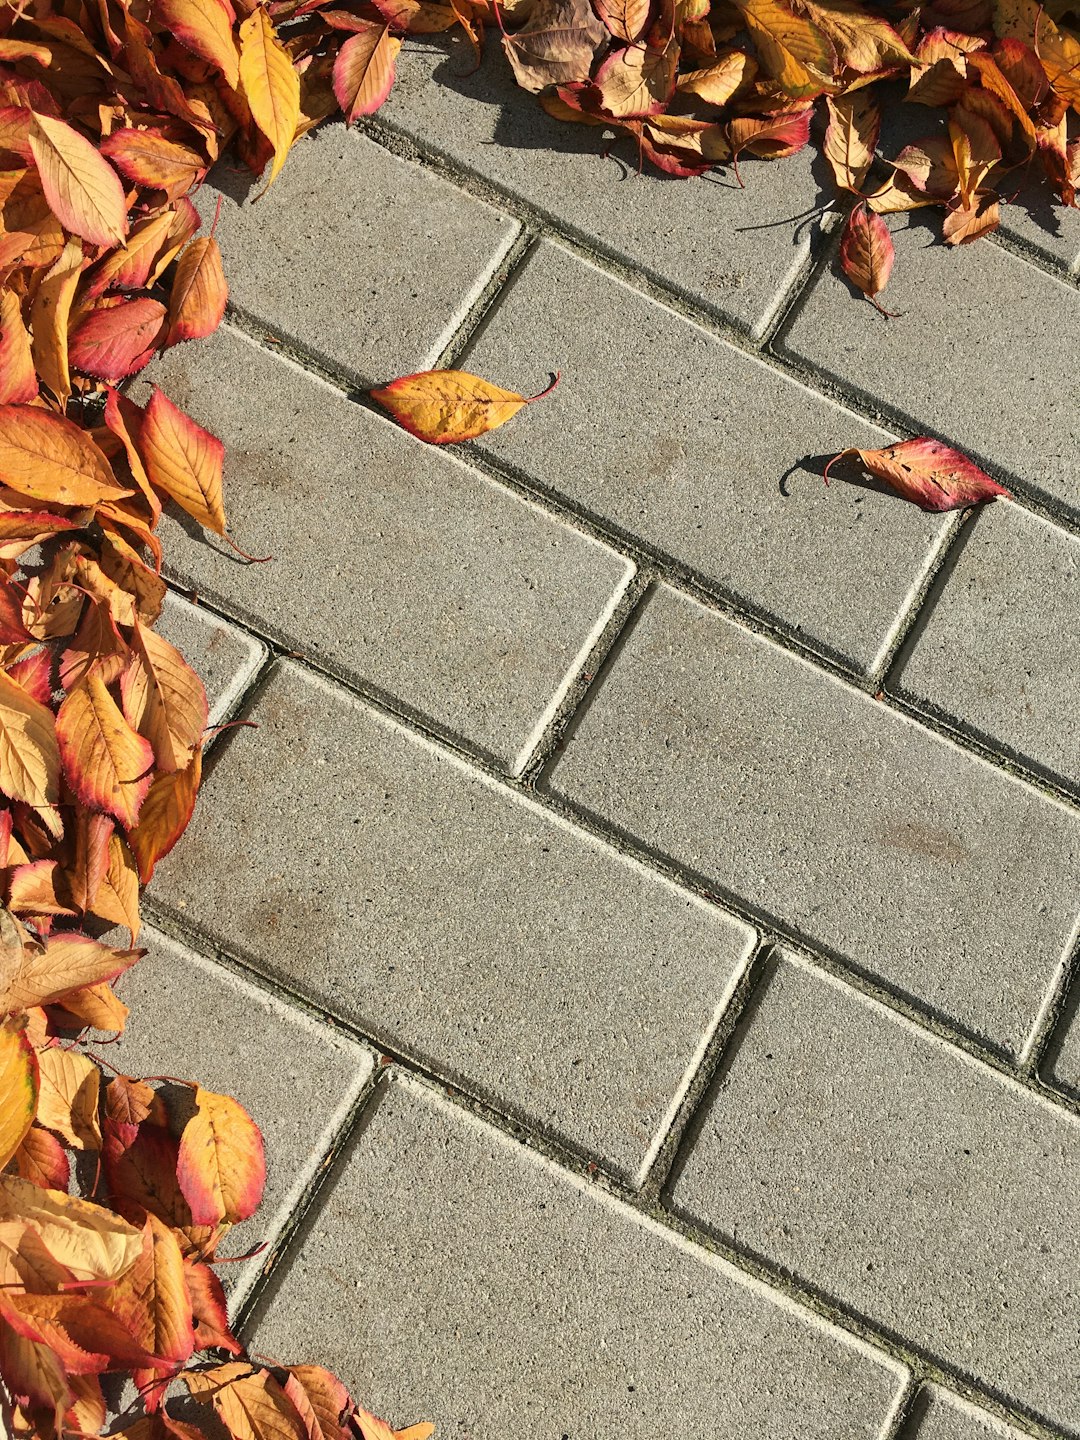 nephthytis health, nephthytis leaves, brown leaves on gray concrete pavement